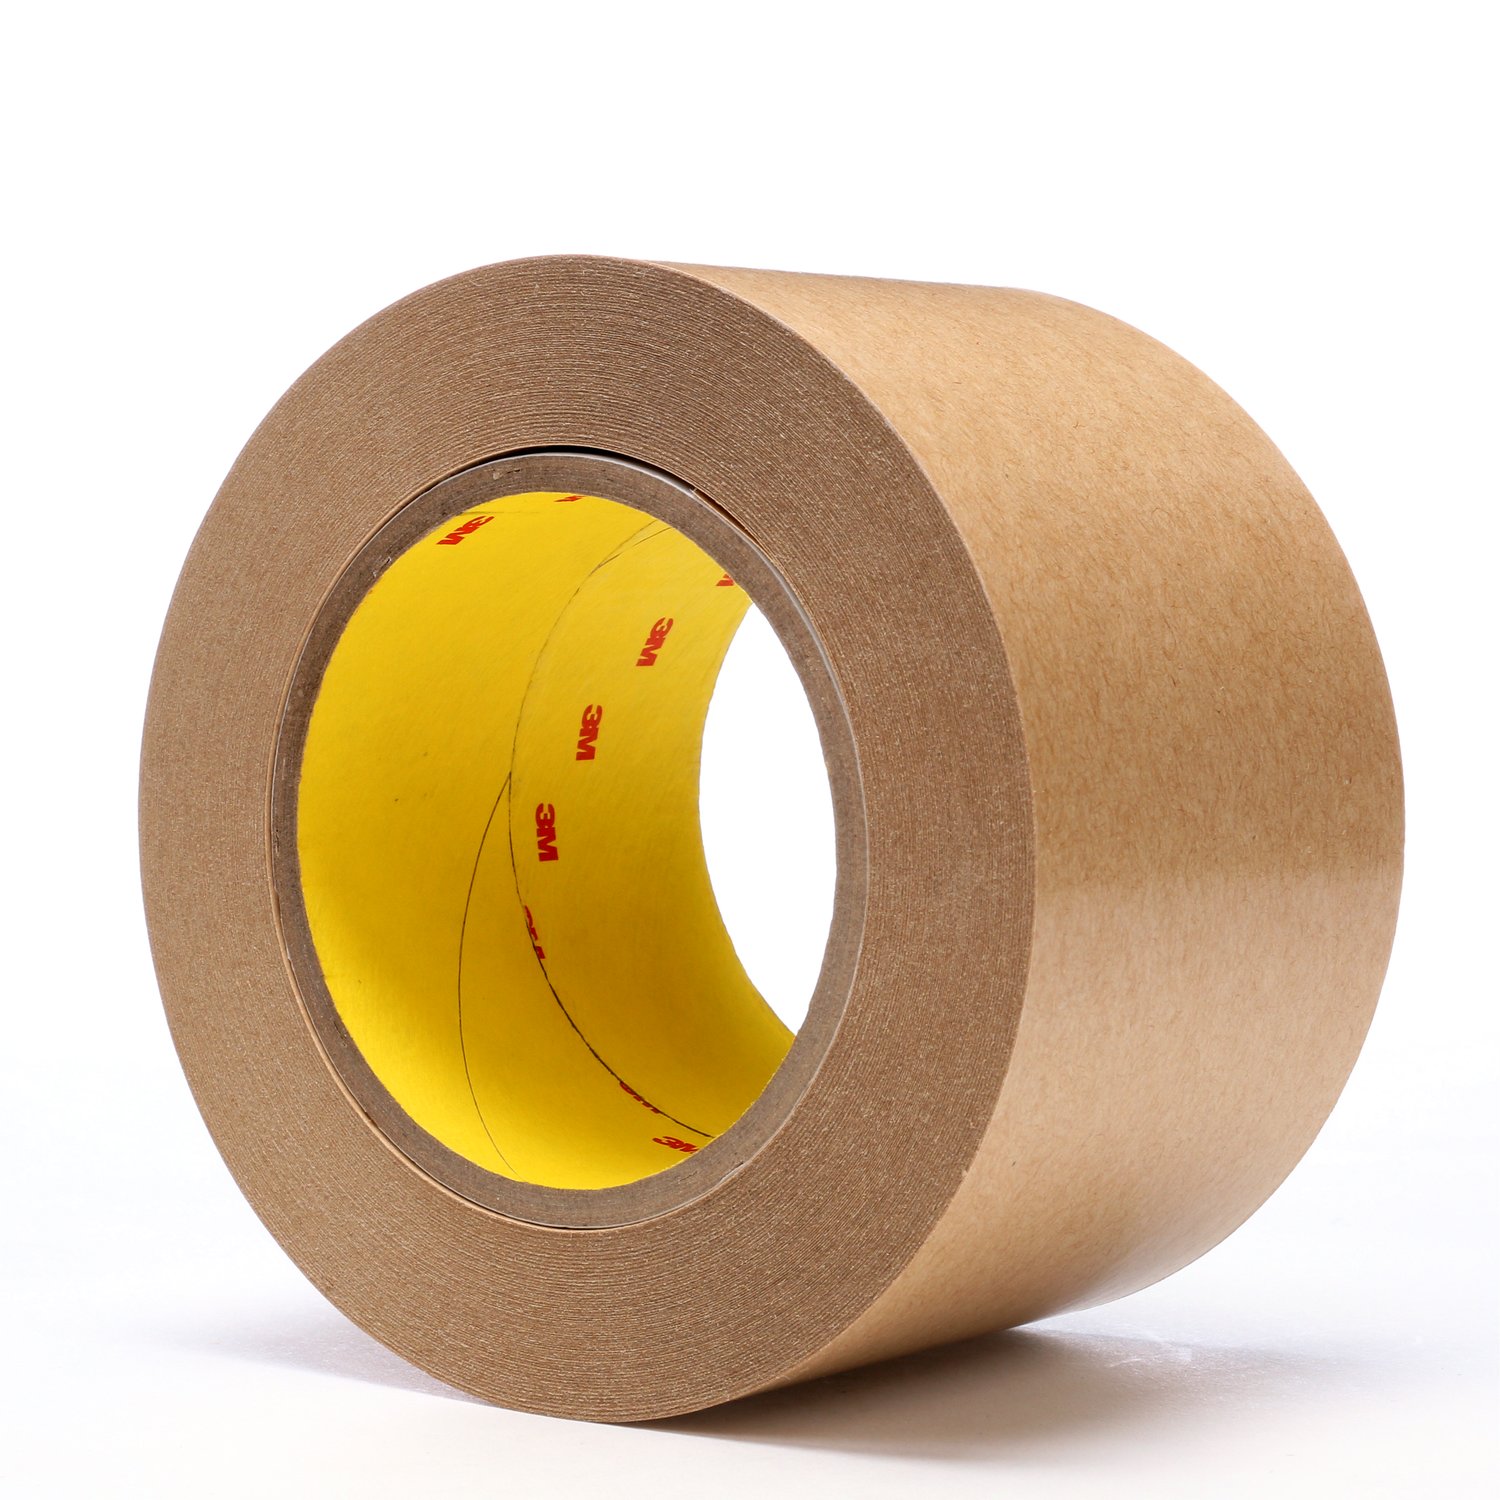 7000122481 - 3M Adhesive Transfer Tape 465, Clear, 3 in x 60 yd, 2 mil, 12 rolls per
case